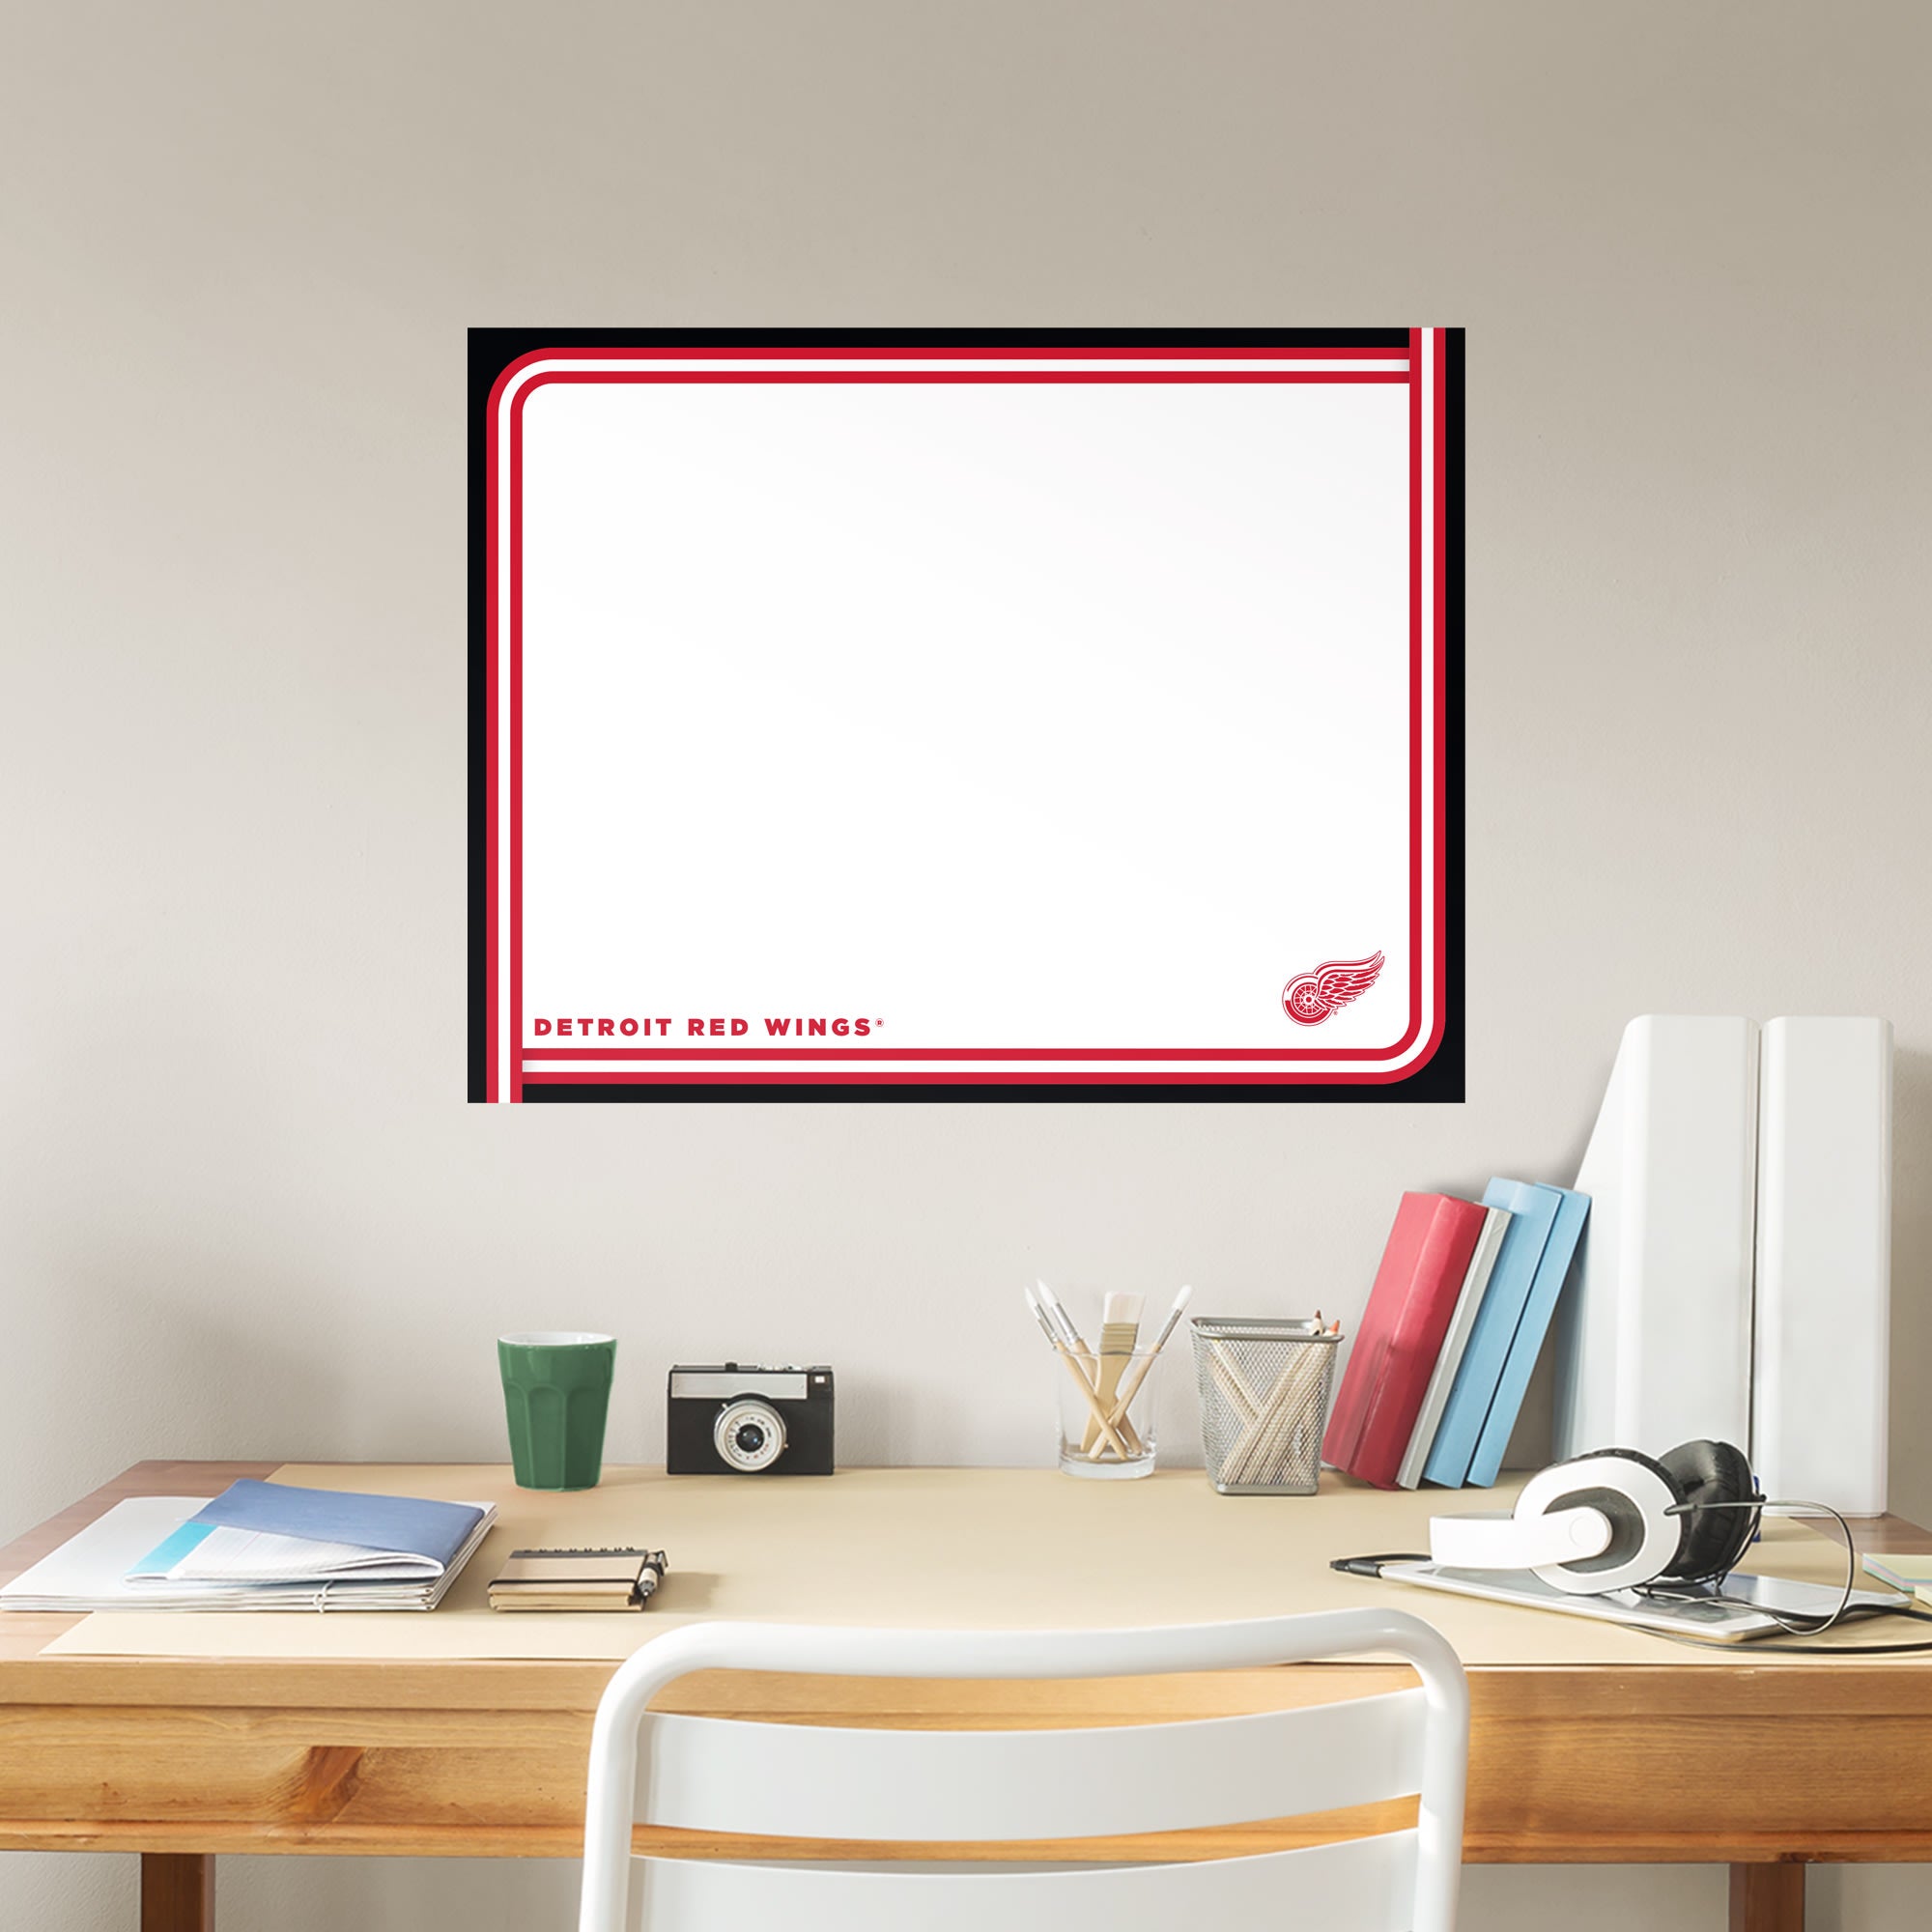 Detroit Red Wings: Dry Erase Whiteboard - X-Large Officially Licensed NHL Removable Wall Decal XL by Fathead | Vinyl